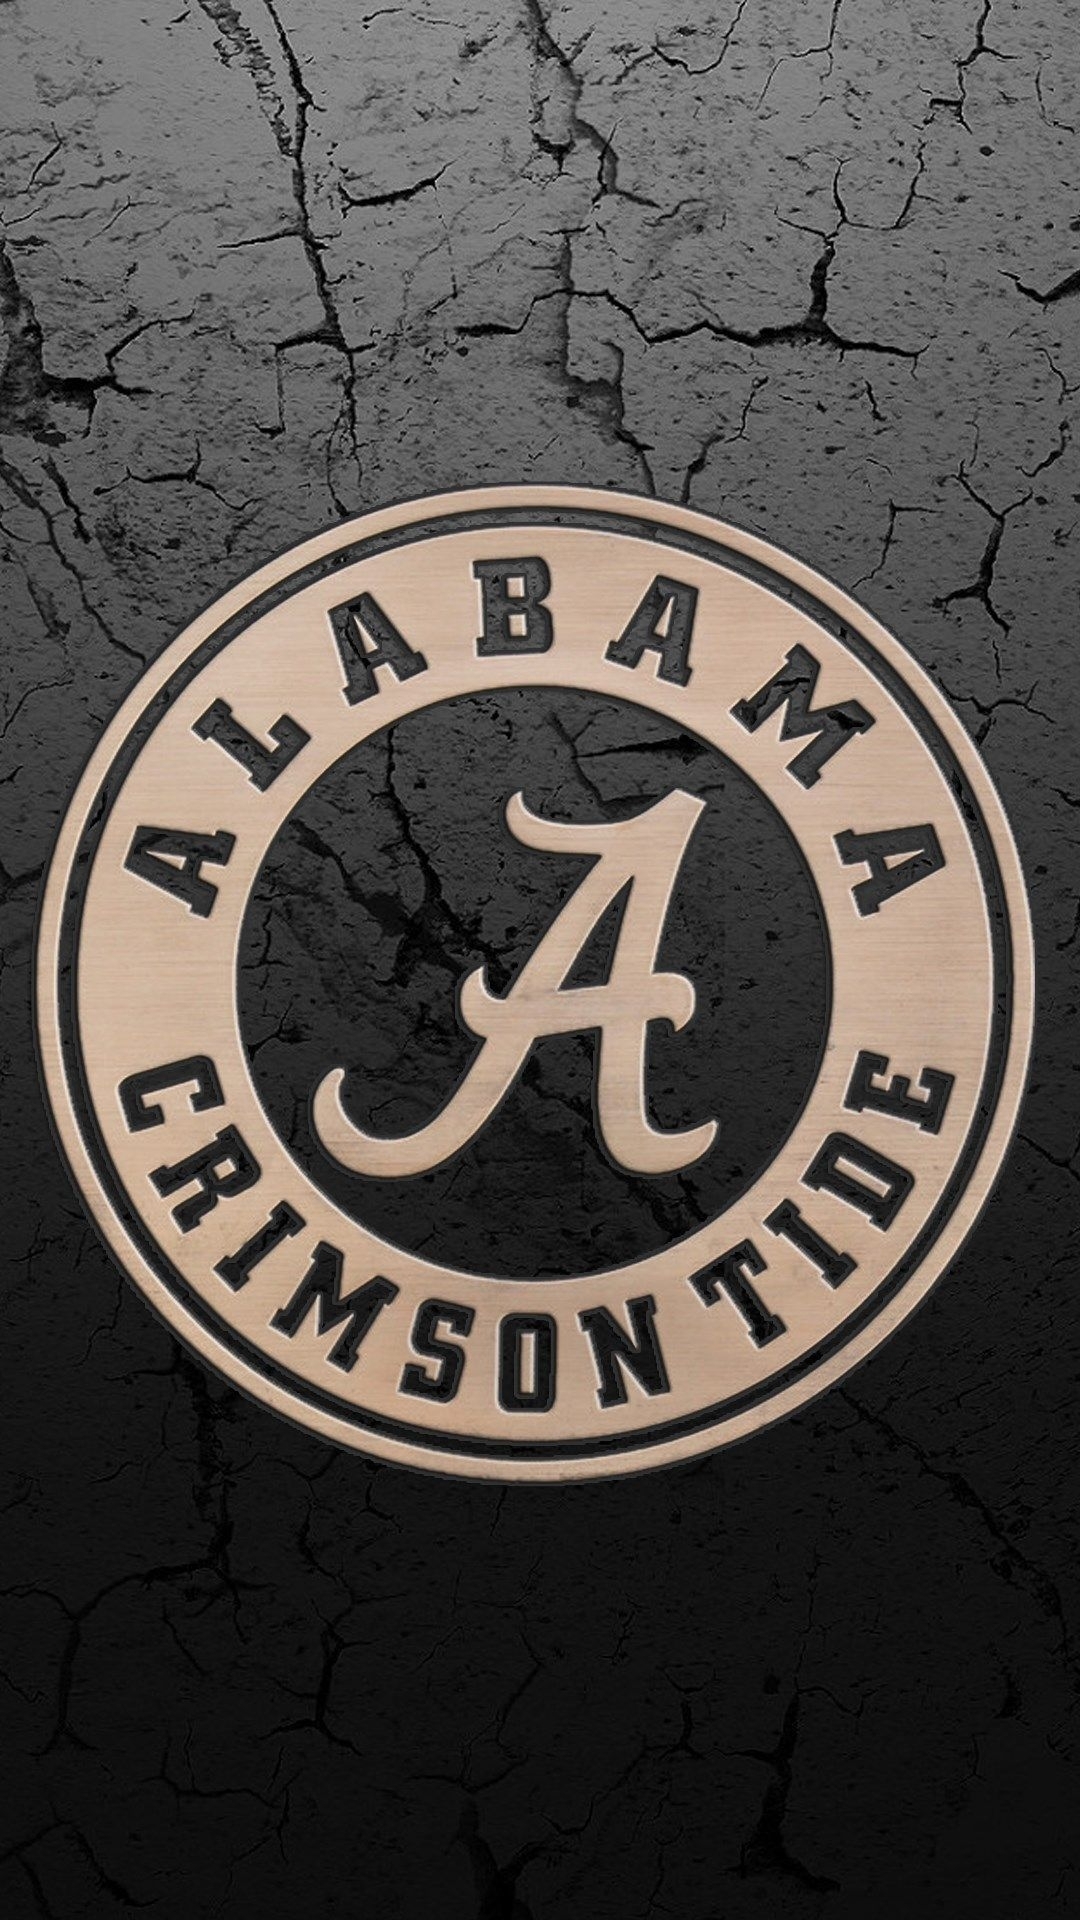 10 Most Popular Alabama Wallpaper For Android FULL HD 1920 ...